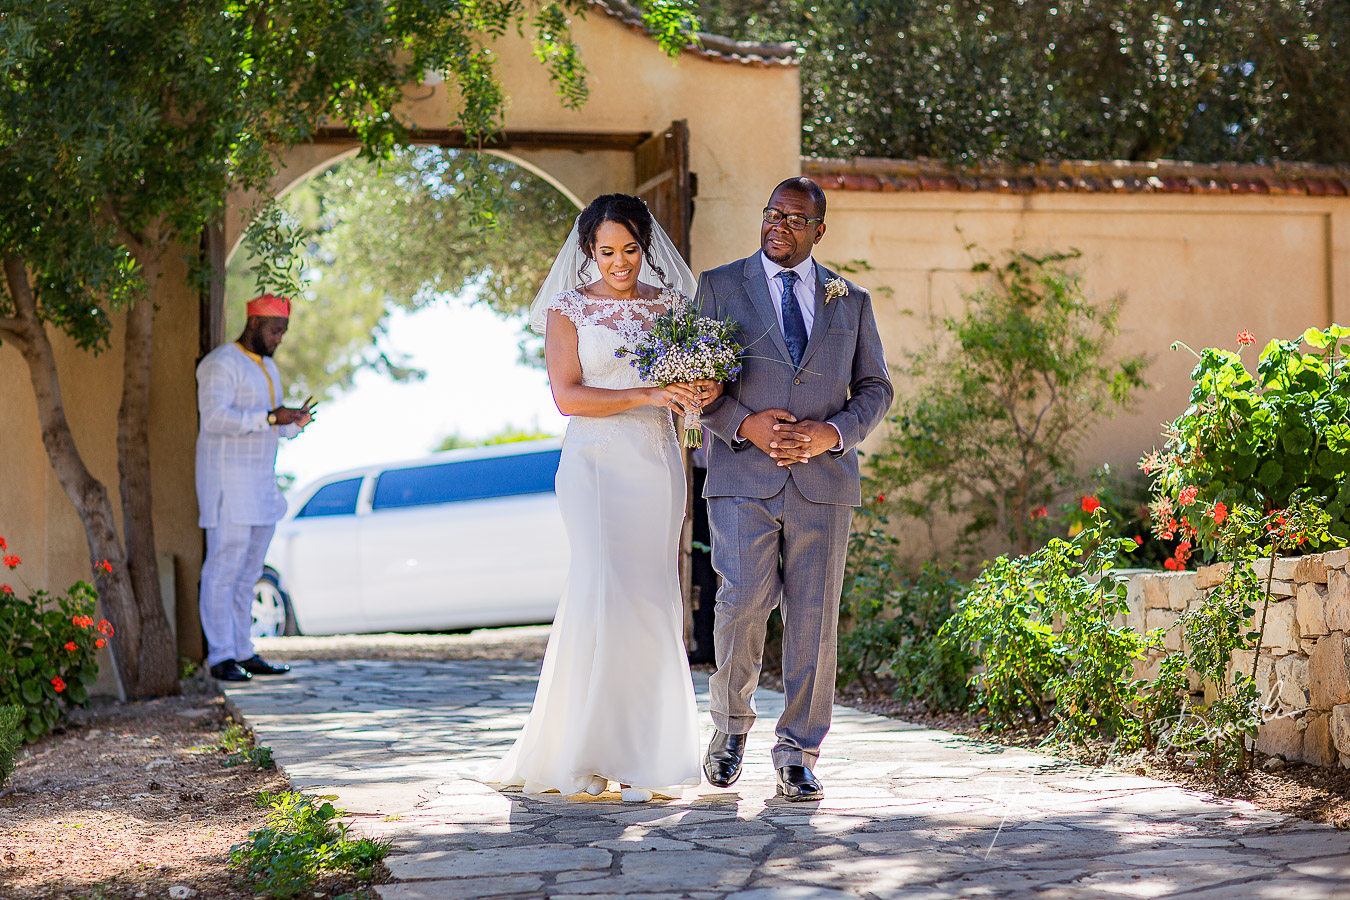 Emotional moment with the bride and her father captured at a wedding at Minthis Hills in Cyprus, by Cristian Dascalu.